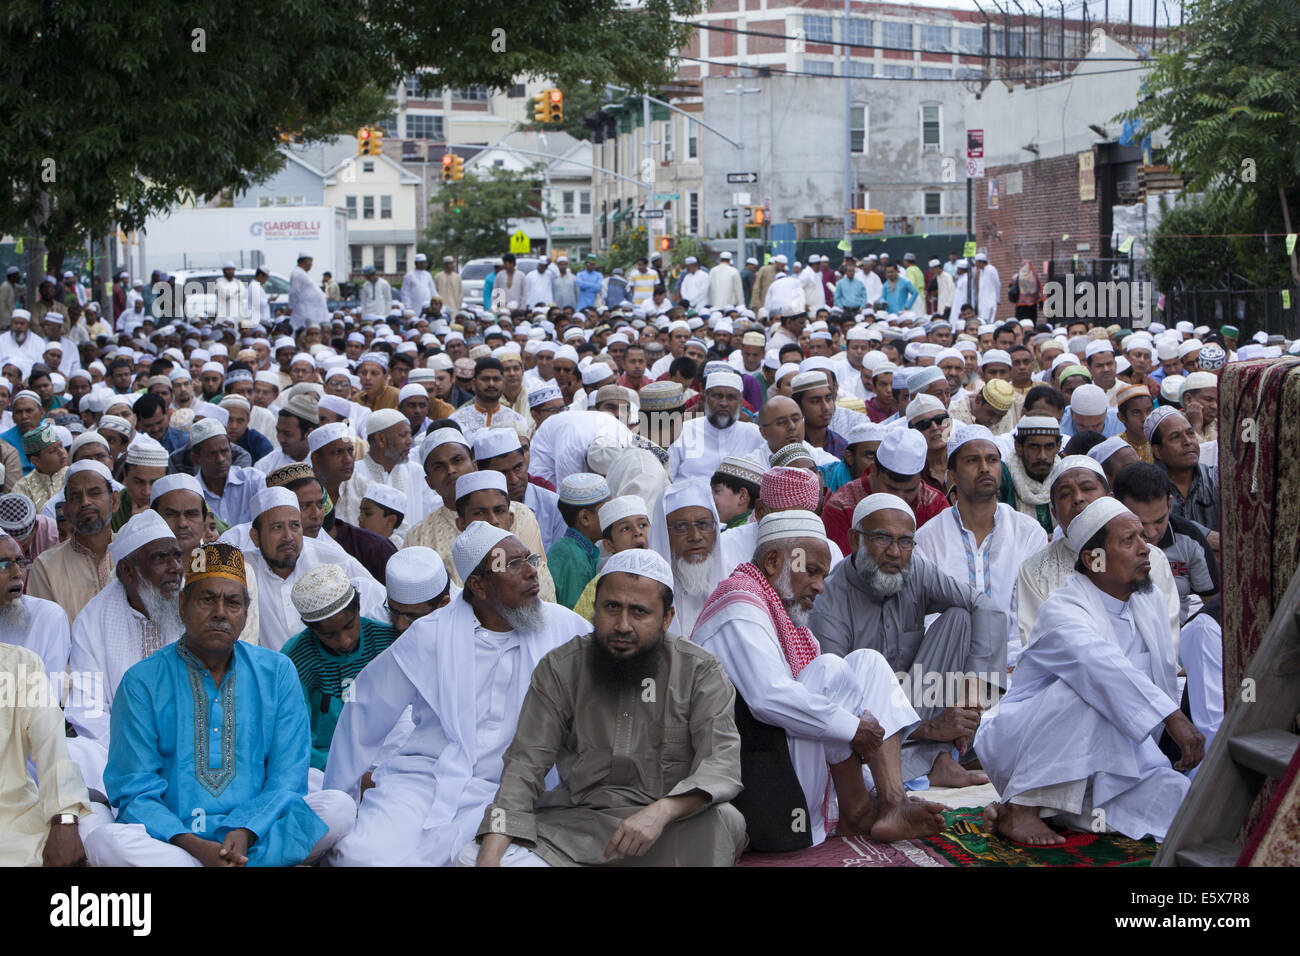 Morning prayers on the street during the Eid holiday after Ramadan in 'Little Bangladesh' in the Kensington neighborhood in Broo Stock Photo